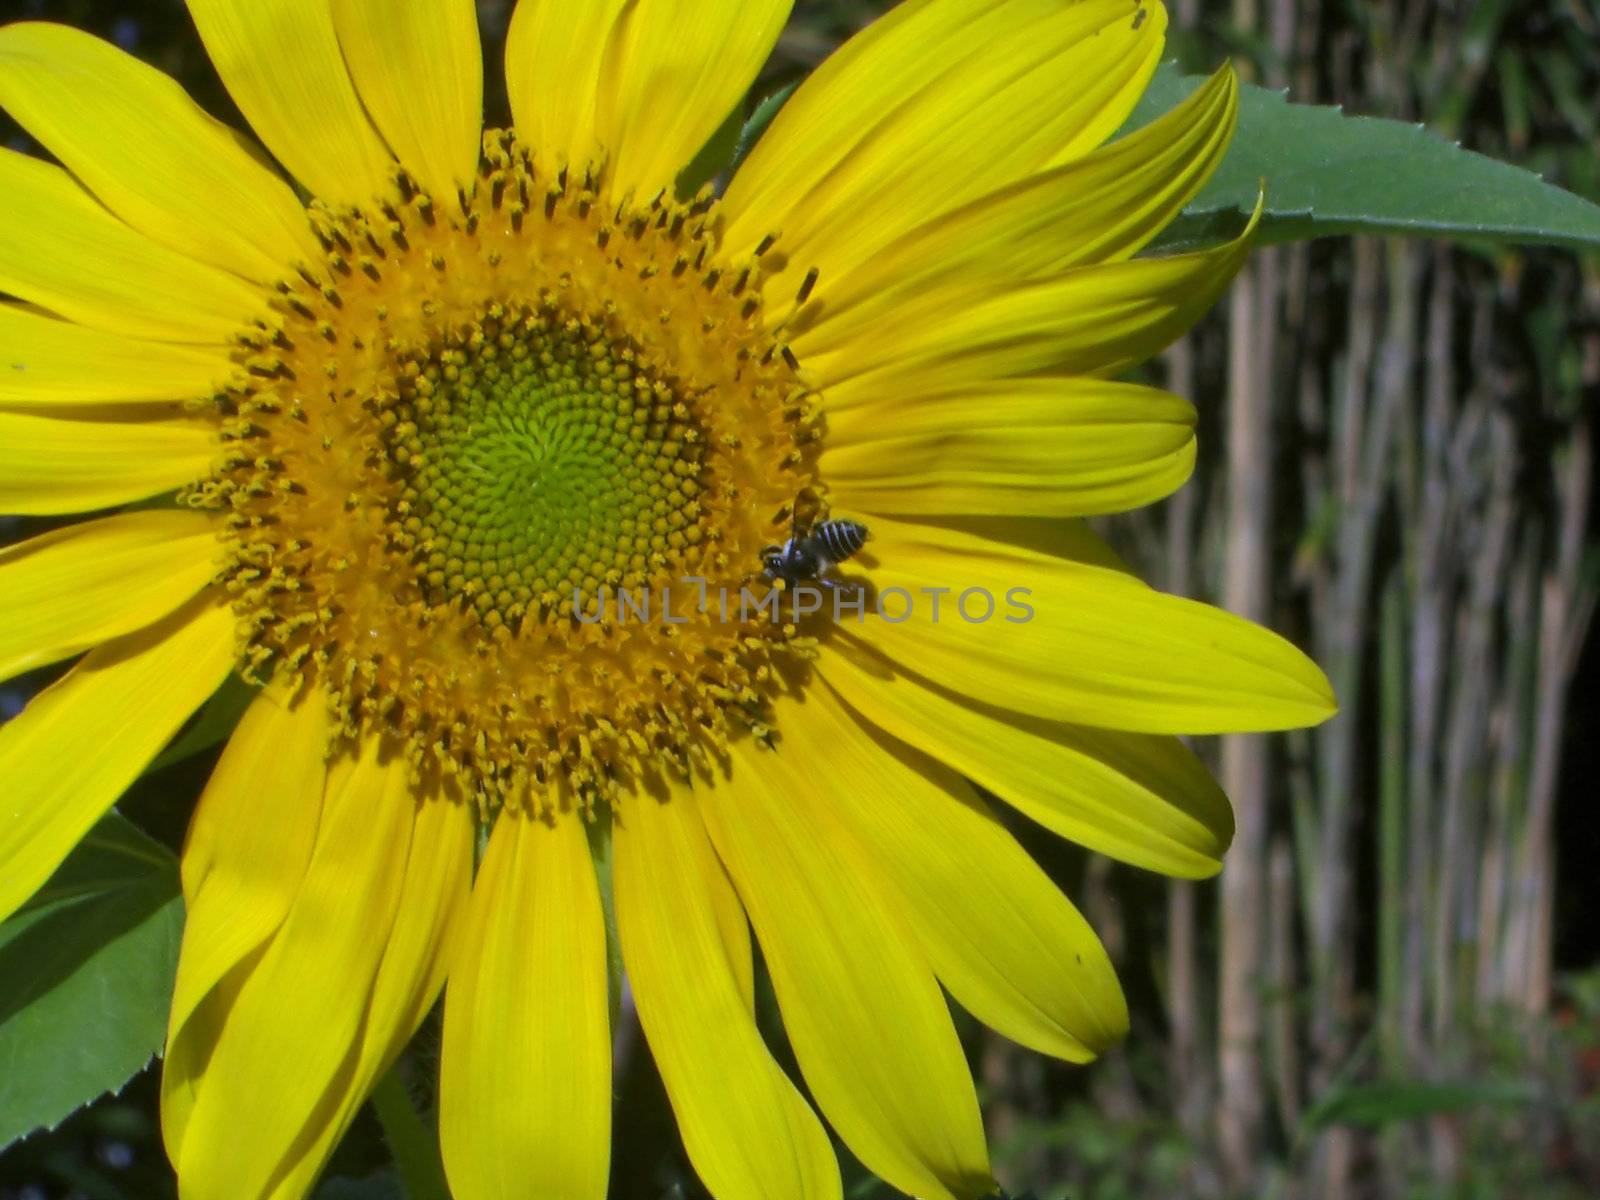 A small bee is pollinating this young and brightly colored sunflower